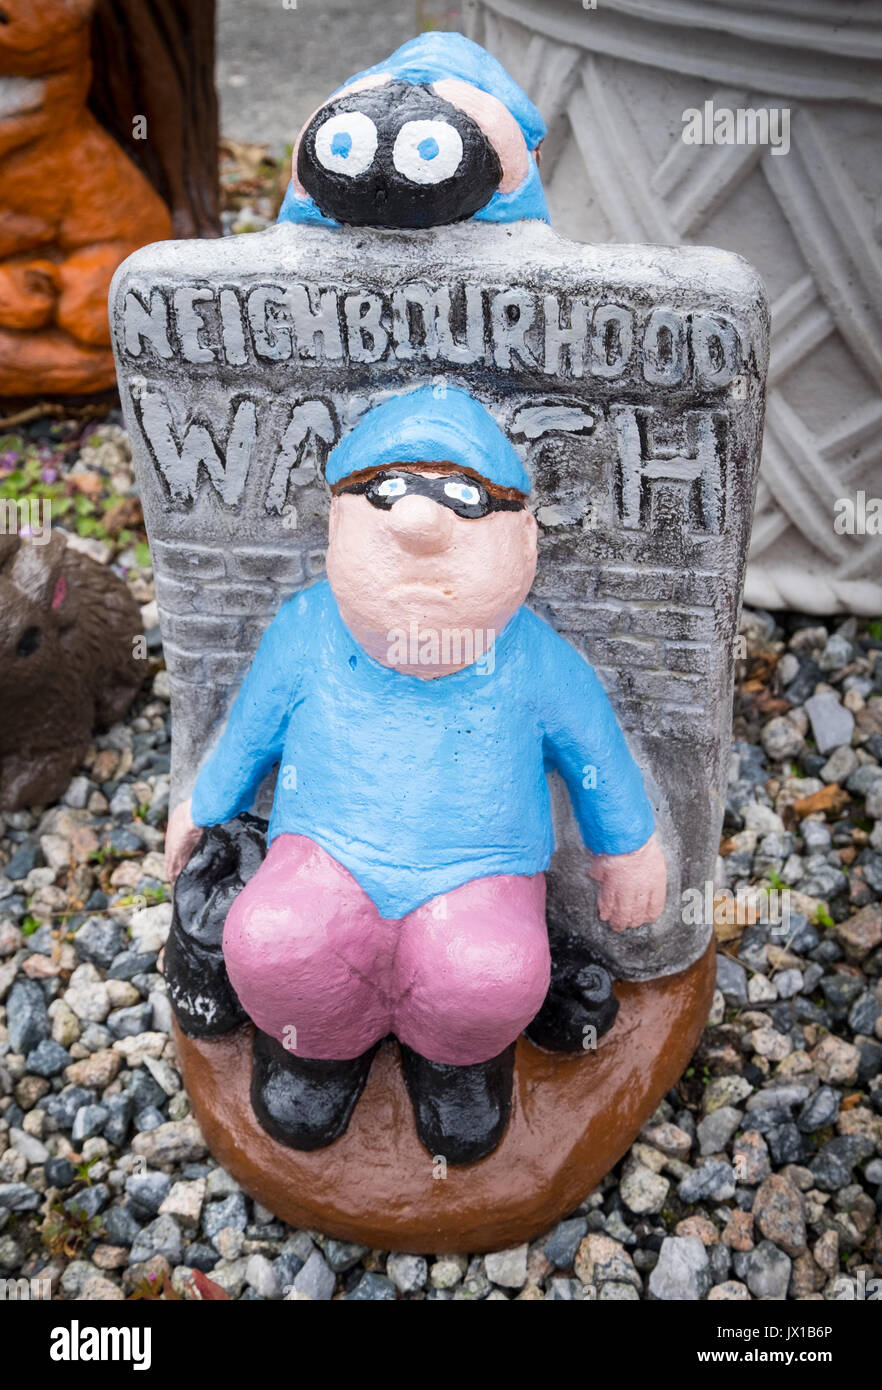 Novelty Neighbourhood Watch garden ornaments on sale at Dartmoor Prison Museum, the ornaments are made by the inmates and sold at the museum. Stock Photo